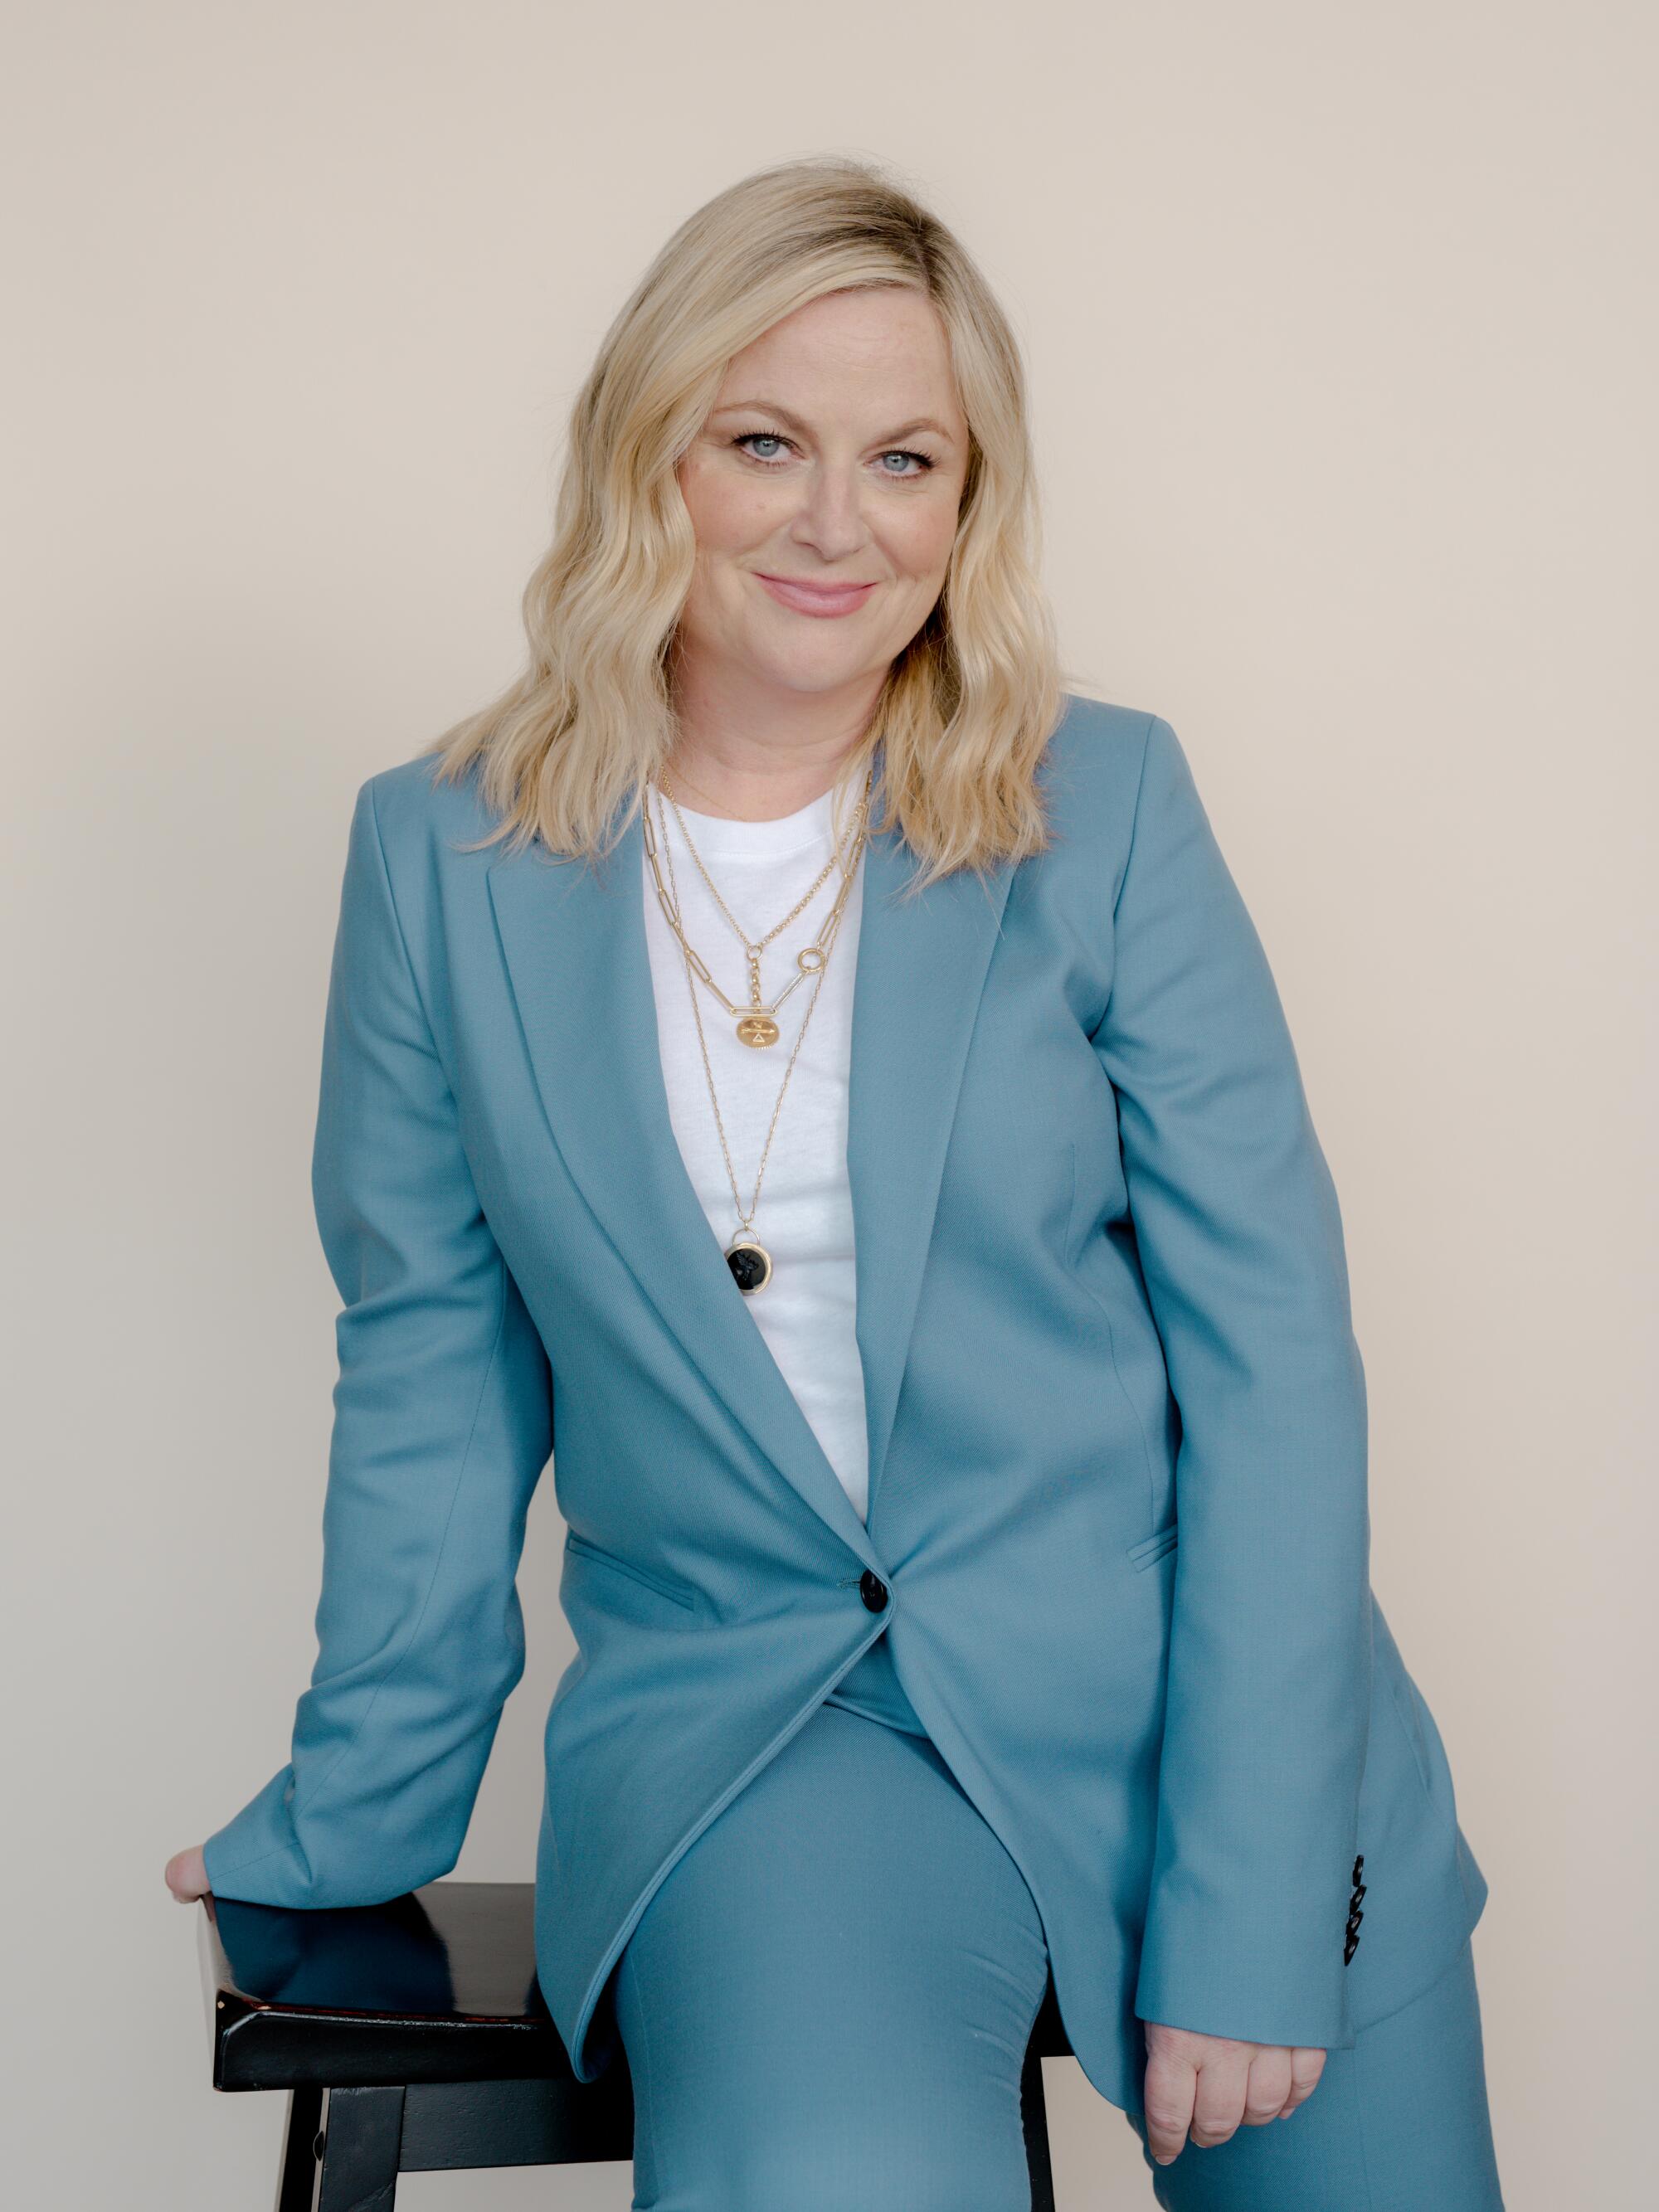 A woman in a light blue suit sits for a portrait against a white background.